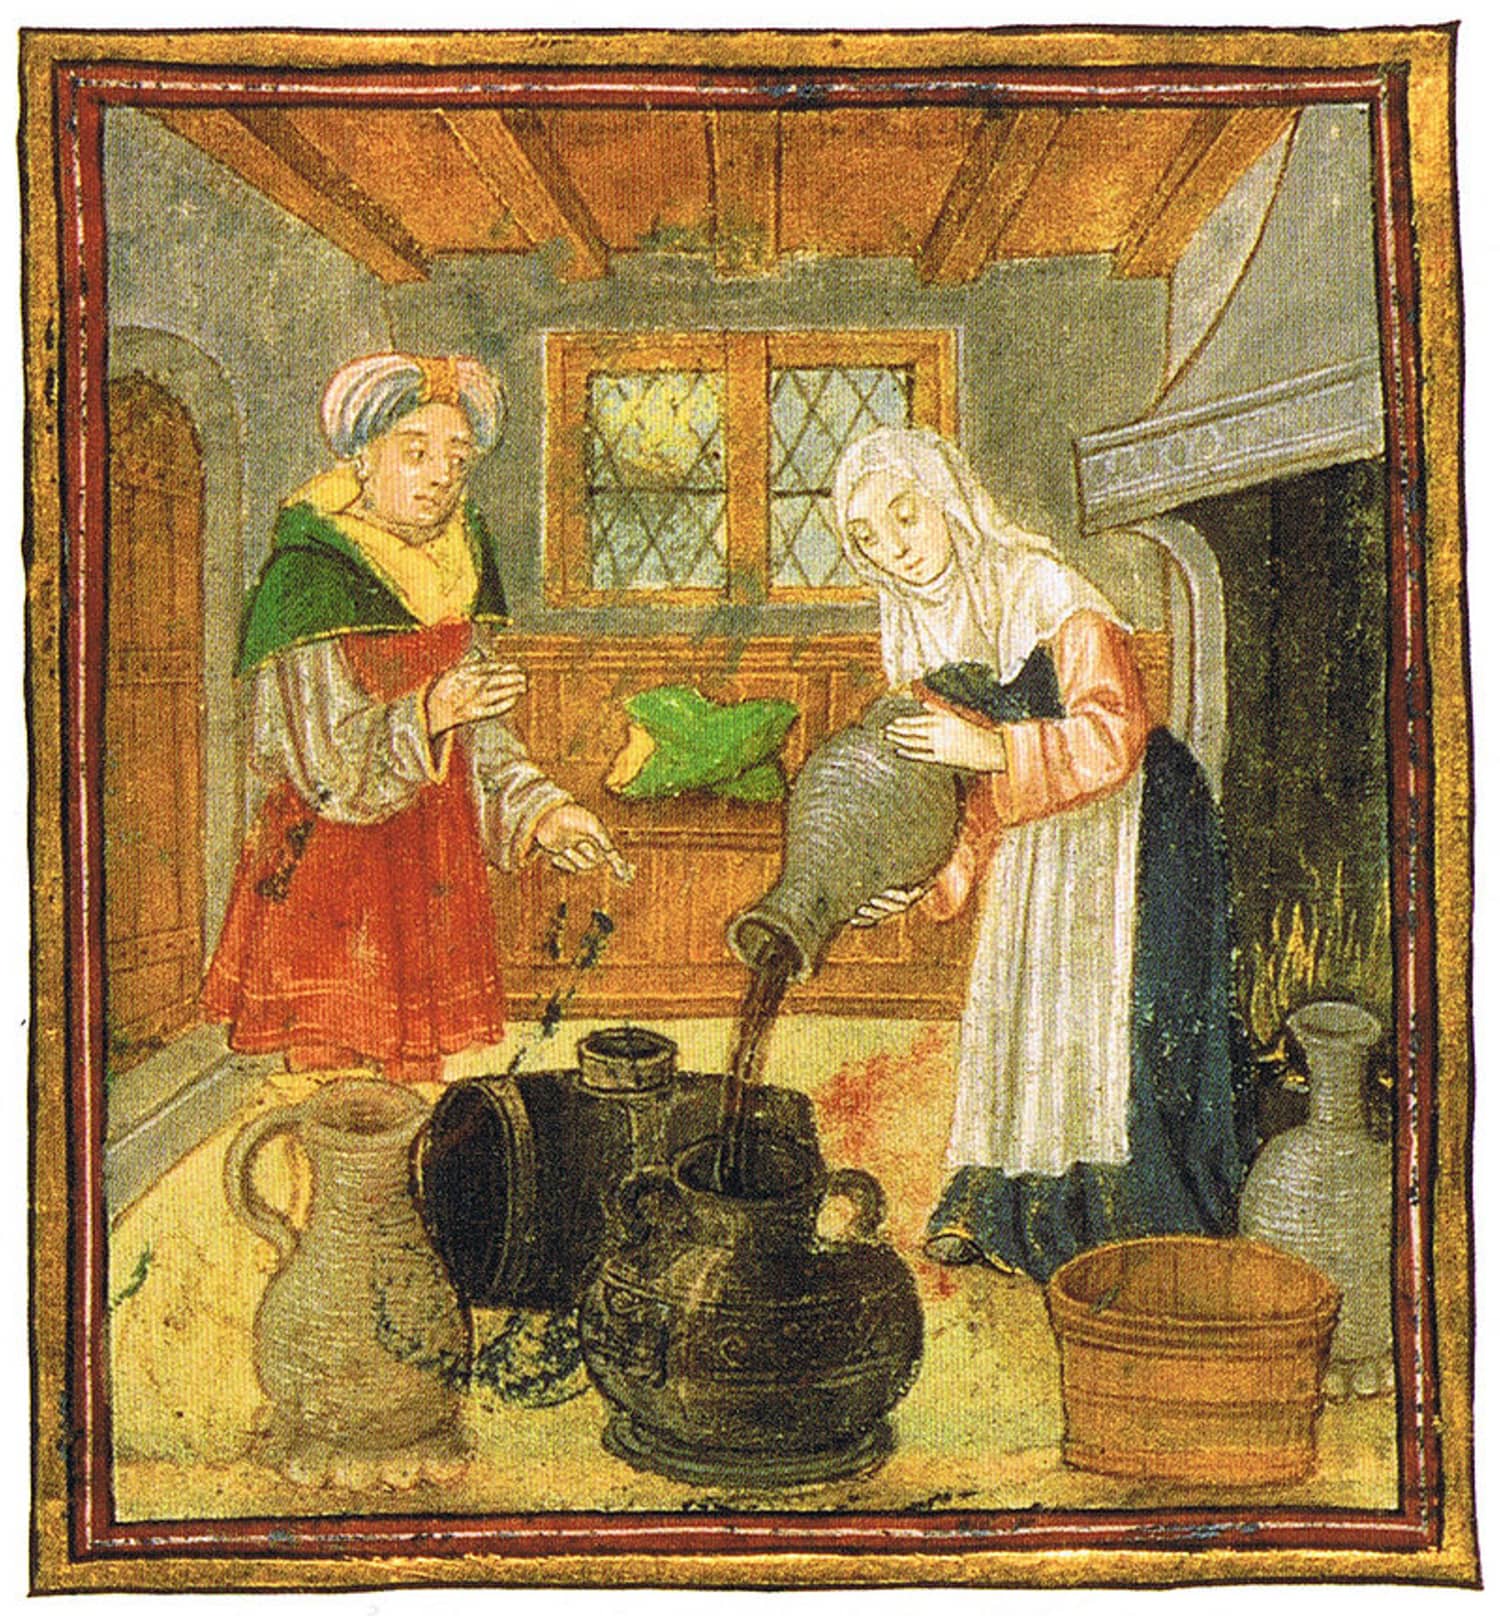 Vintage Advice 14th Century Homemaking From A Medieval Home